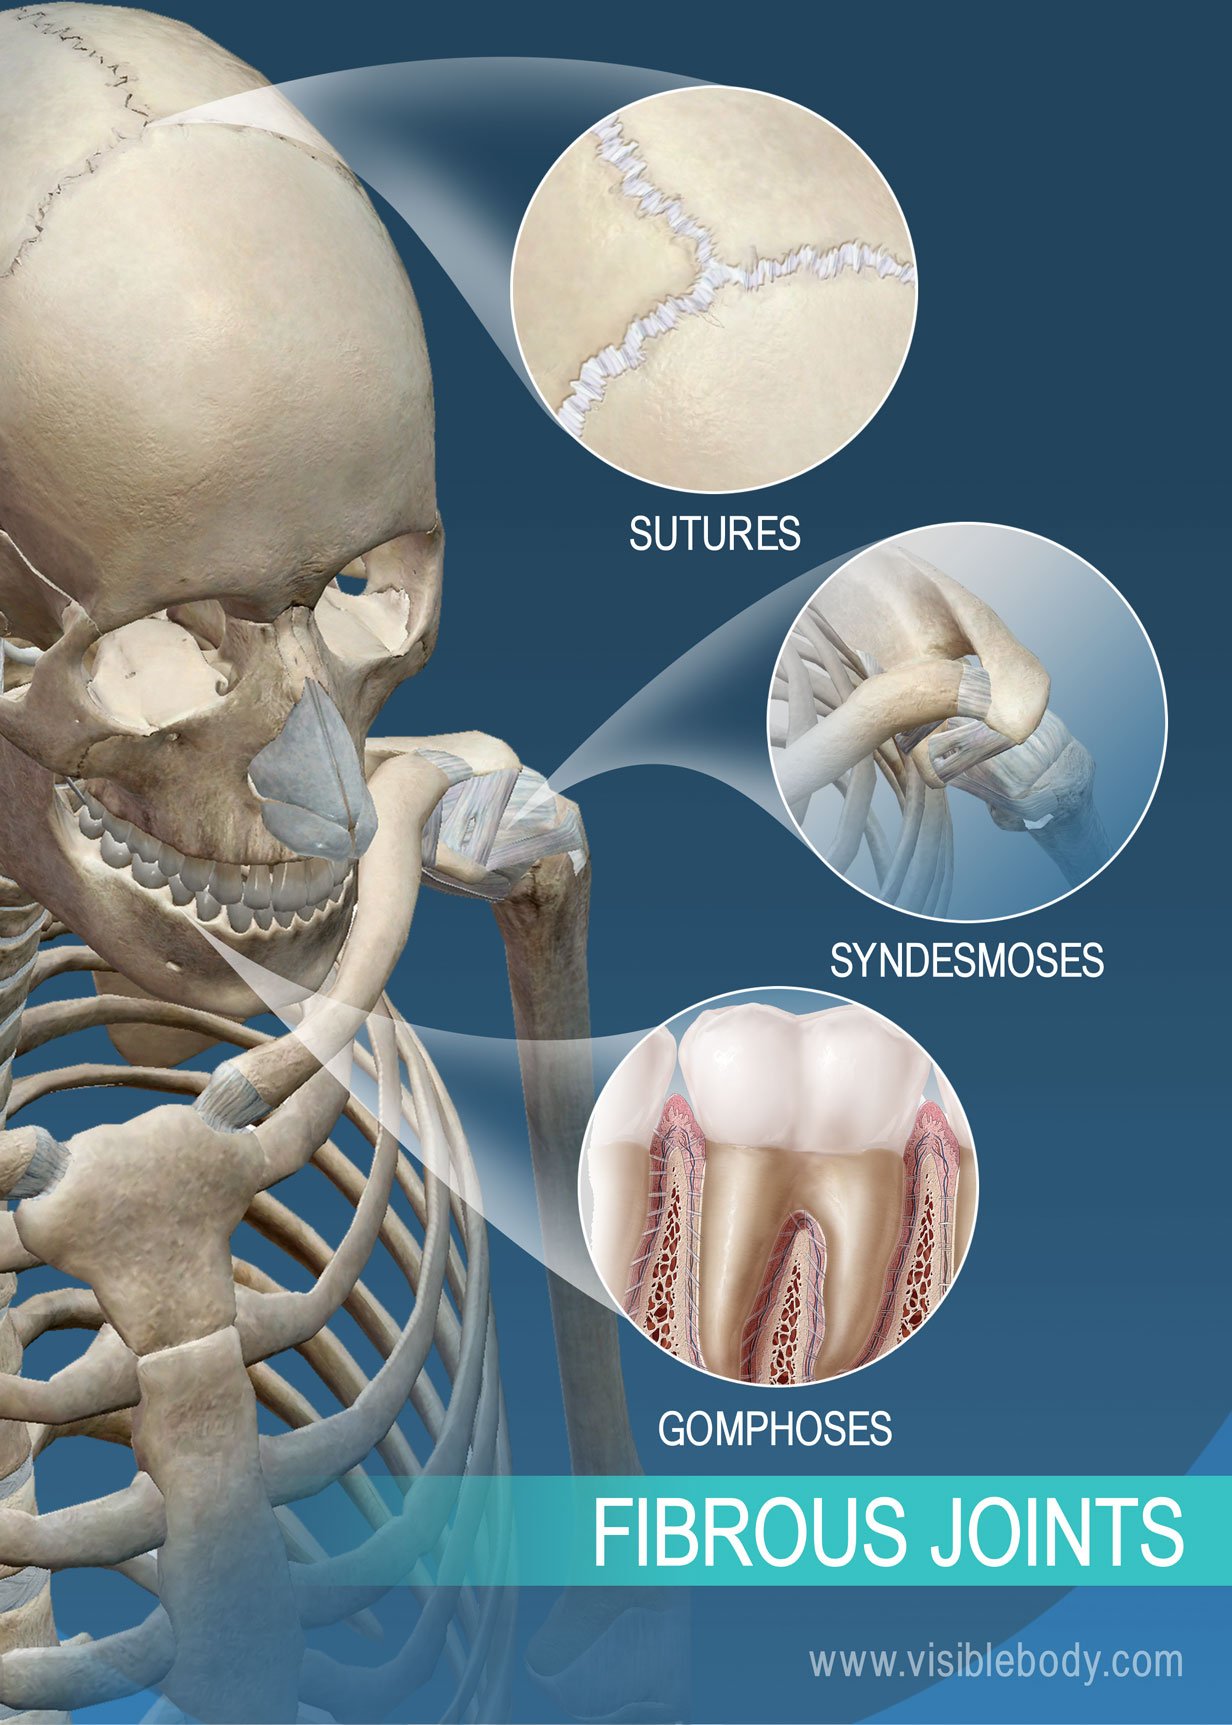 Sutures, syndesmoses, and gomphoses: fibrous joints